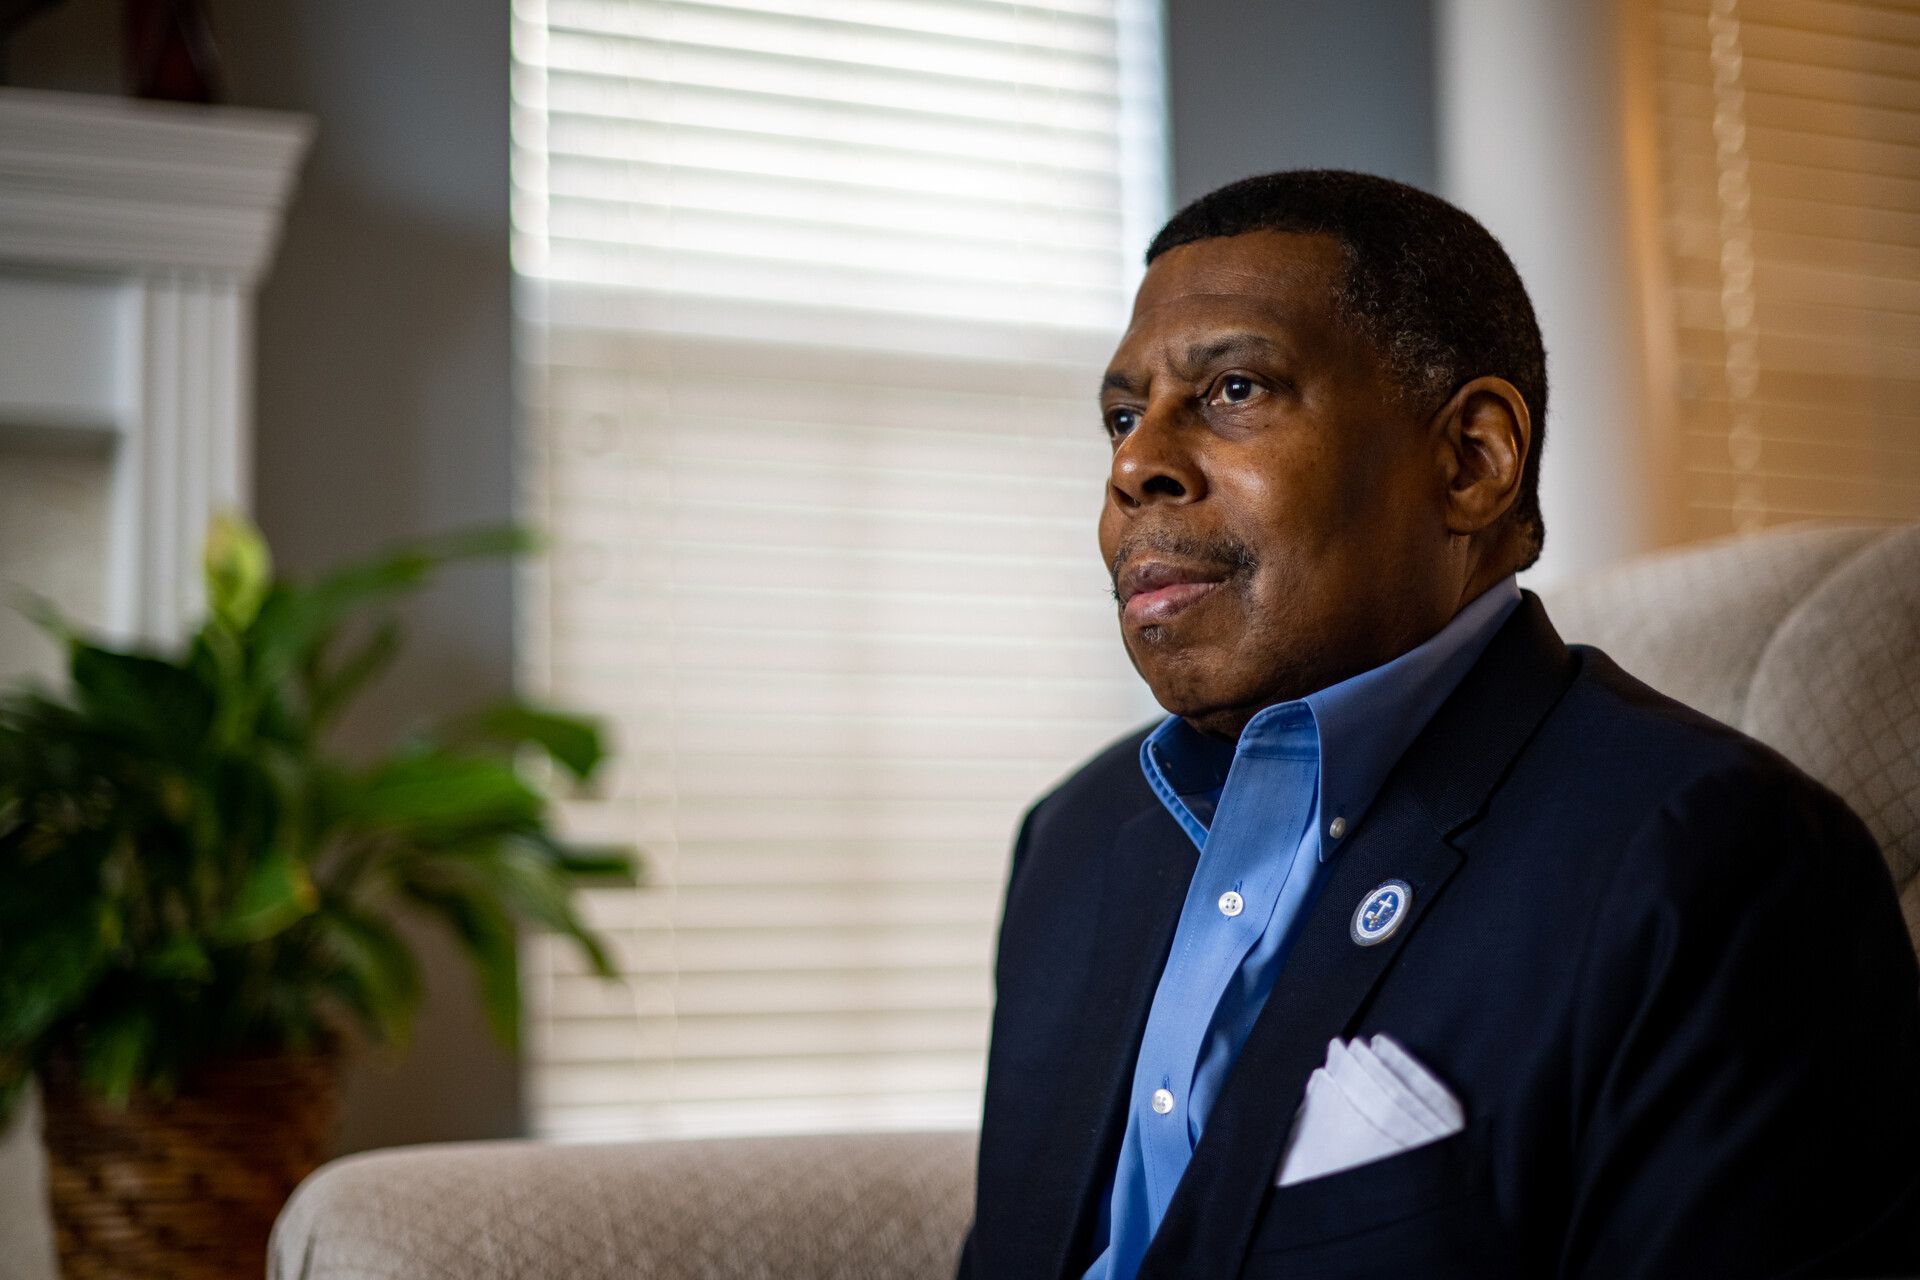 A distinguished middle-aged Black man wearing a blue collared shirt and blue jacket sits in a well-lit living room, his eyes looking into the distance